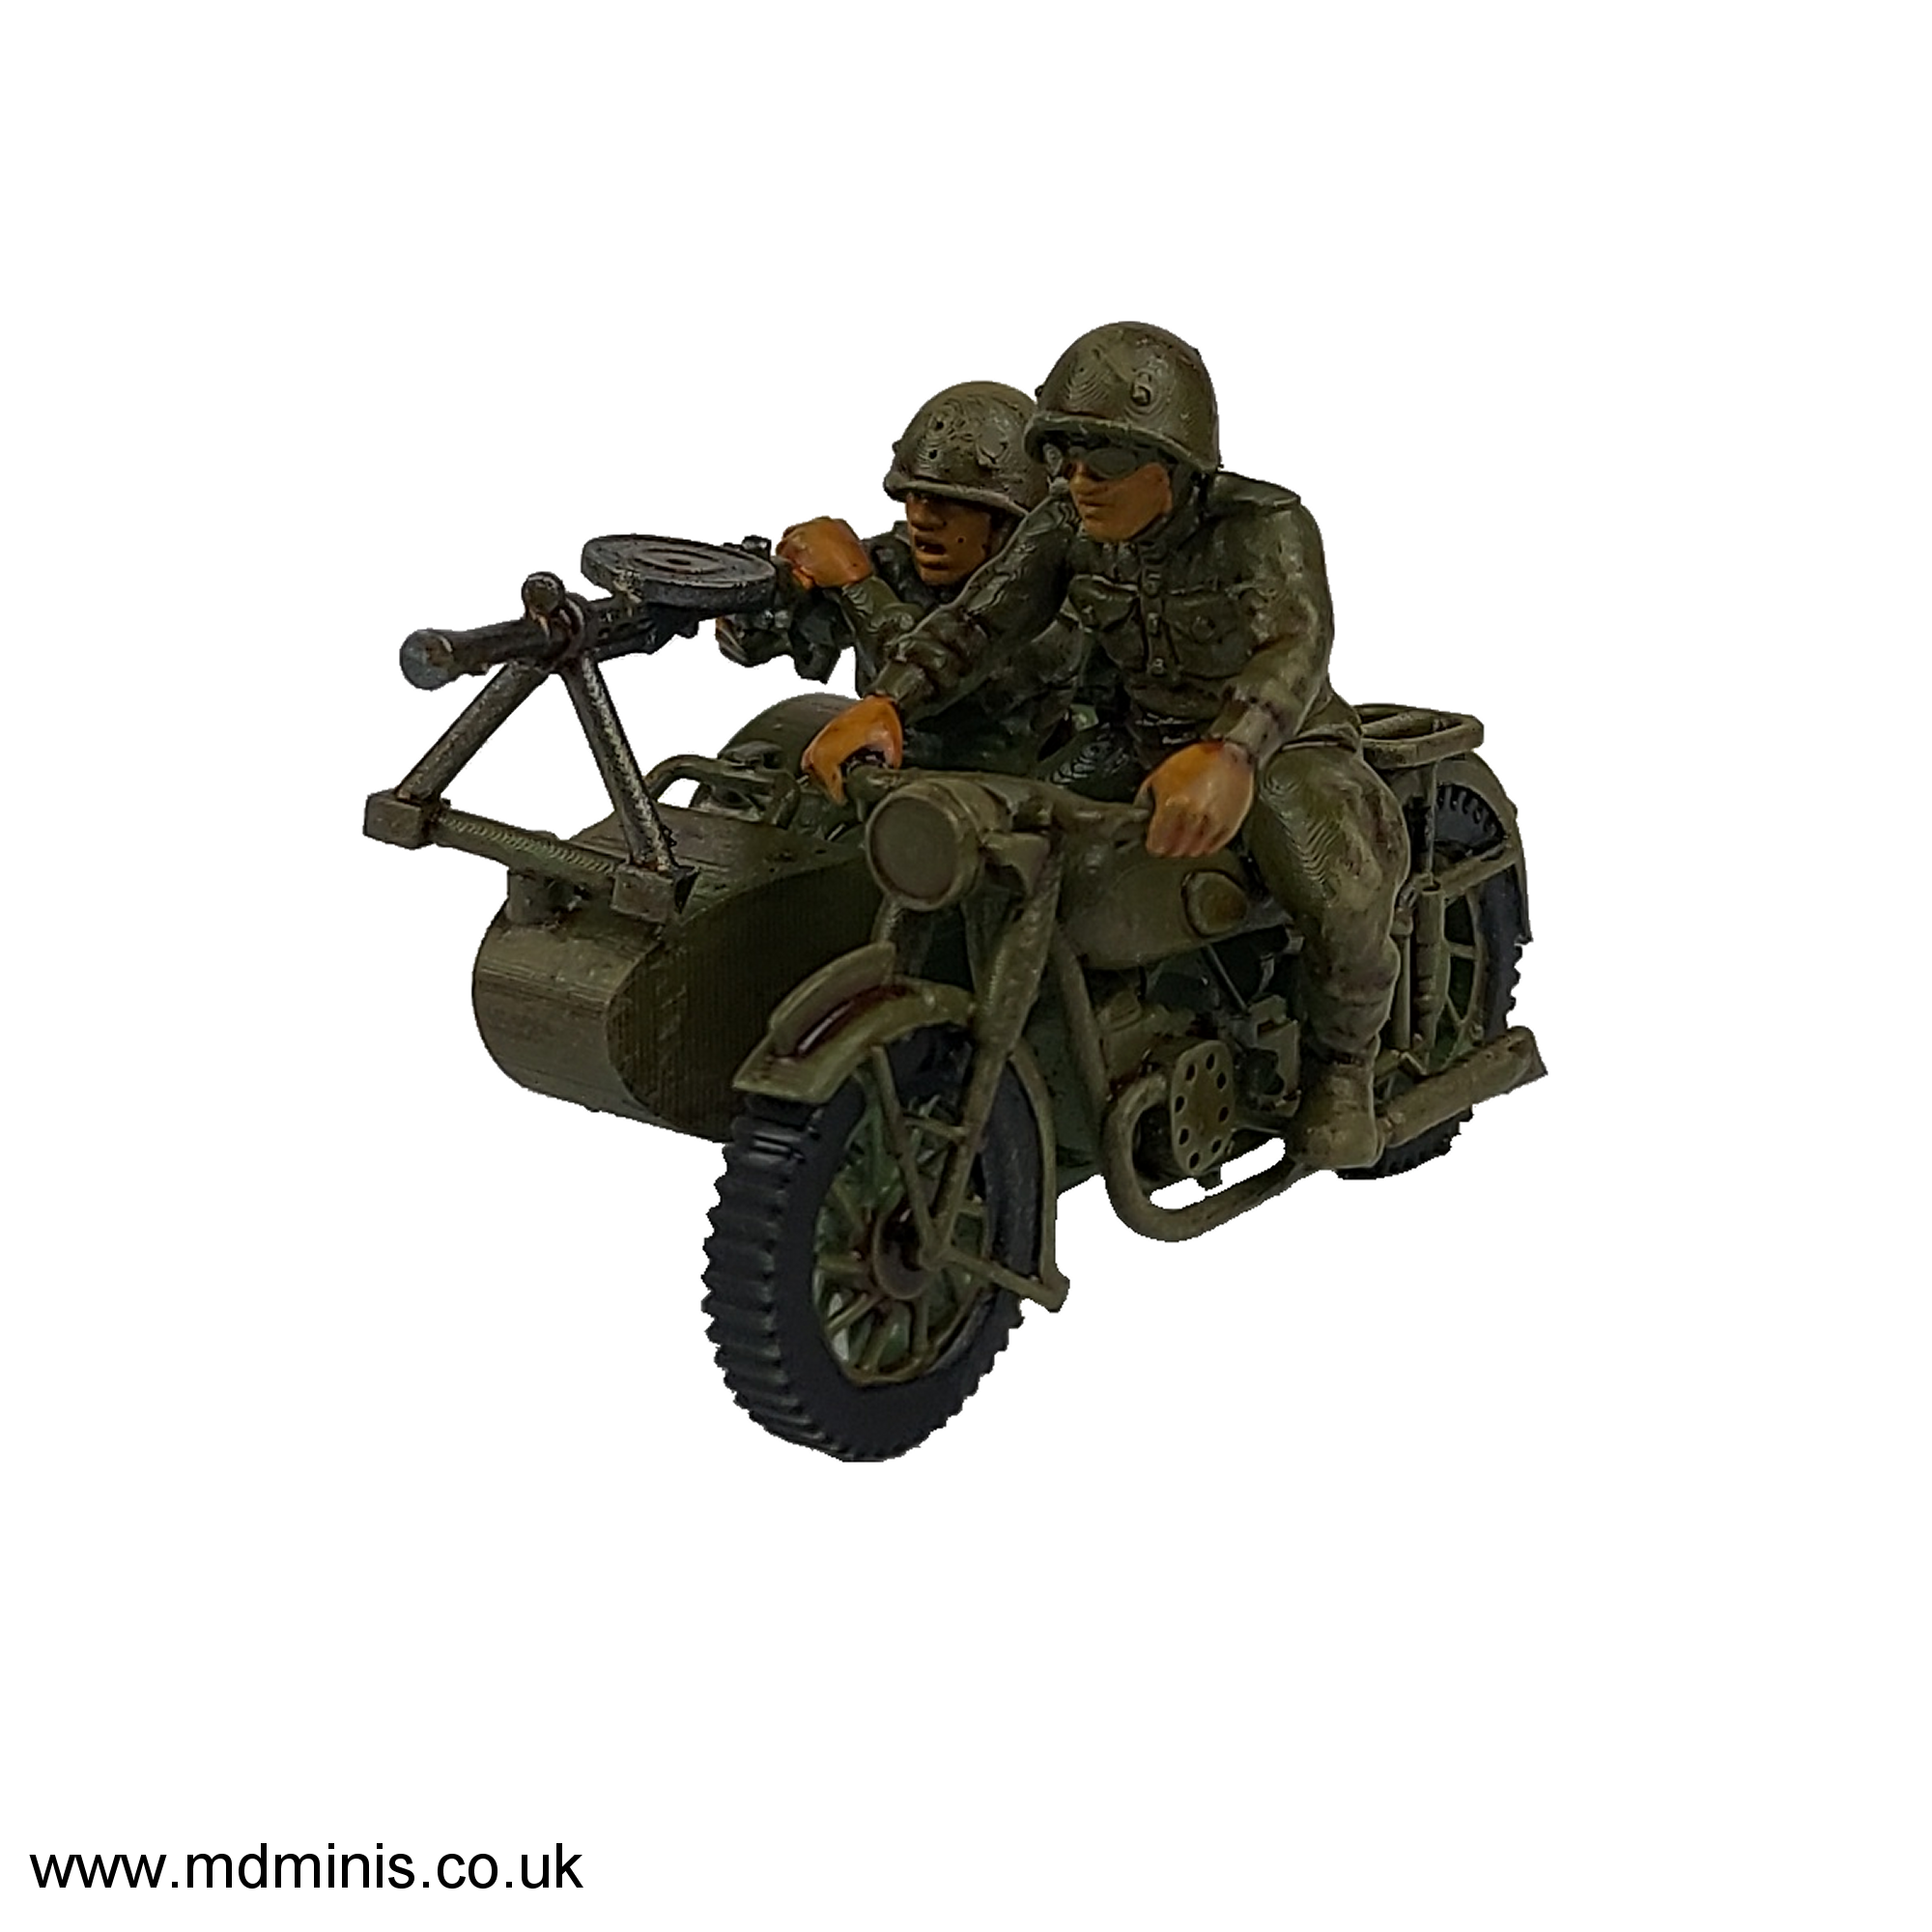 Painted 28mm resin 3D printed model of World War II Soviet Motorcycle and MMG sidecar.